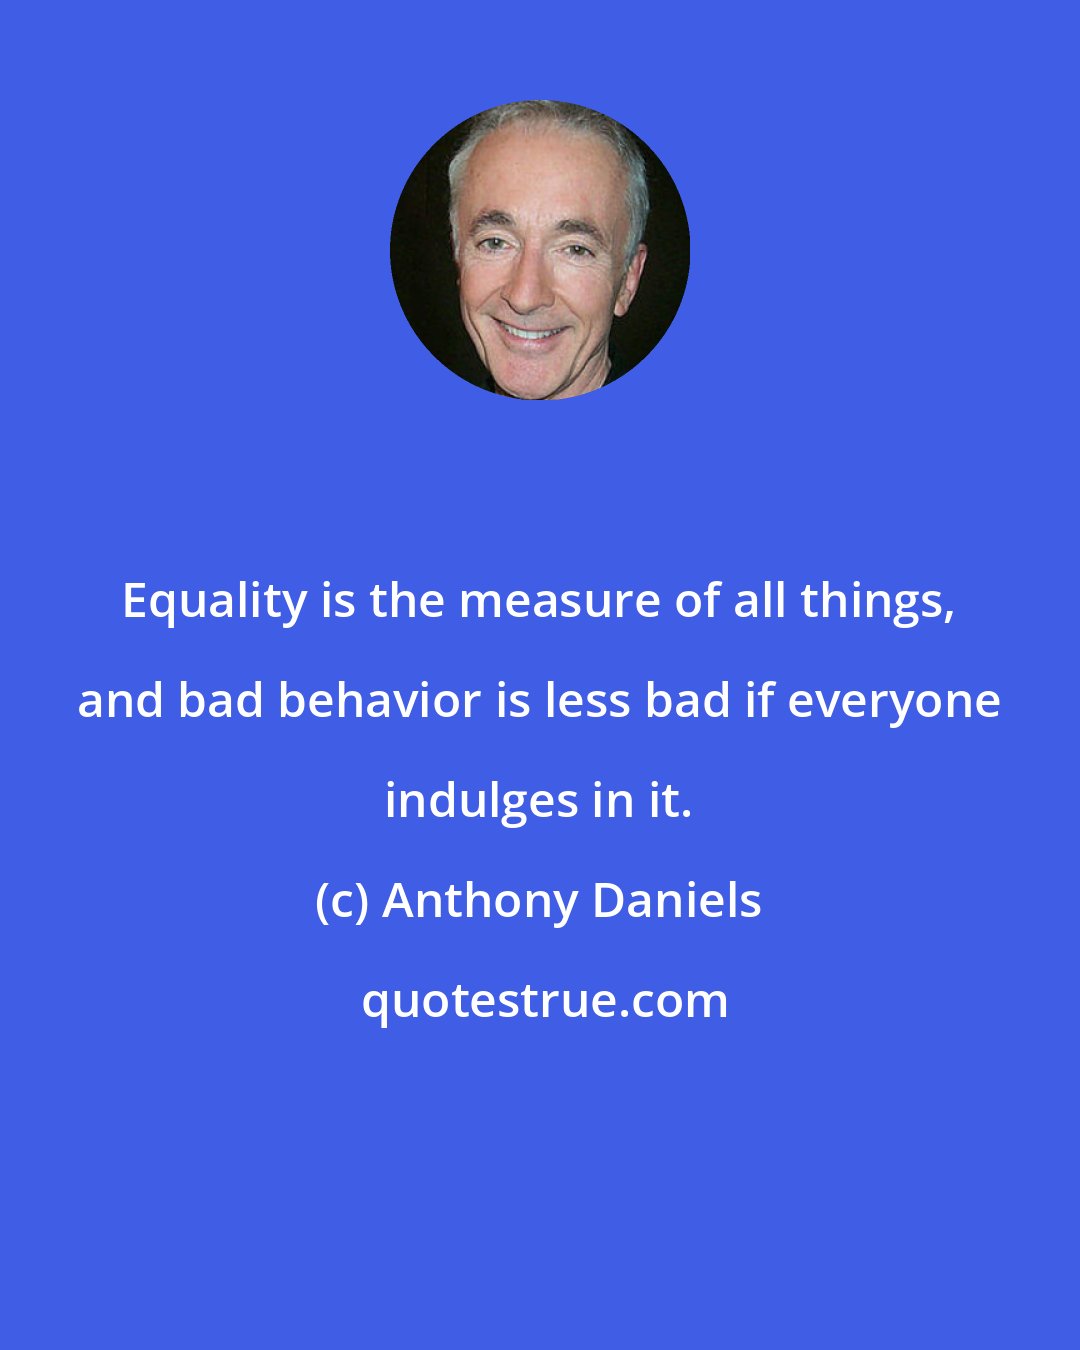 Anthony Daniels: Equality is the measure of all things, and bad behavior is less bad if everyone indulges in it.